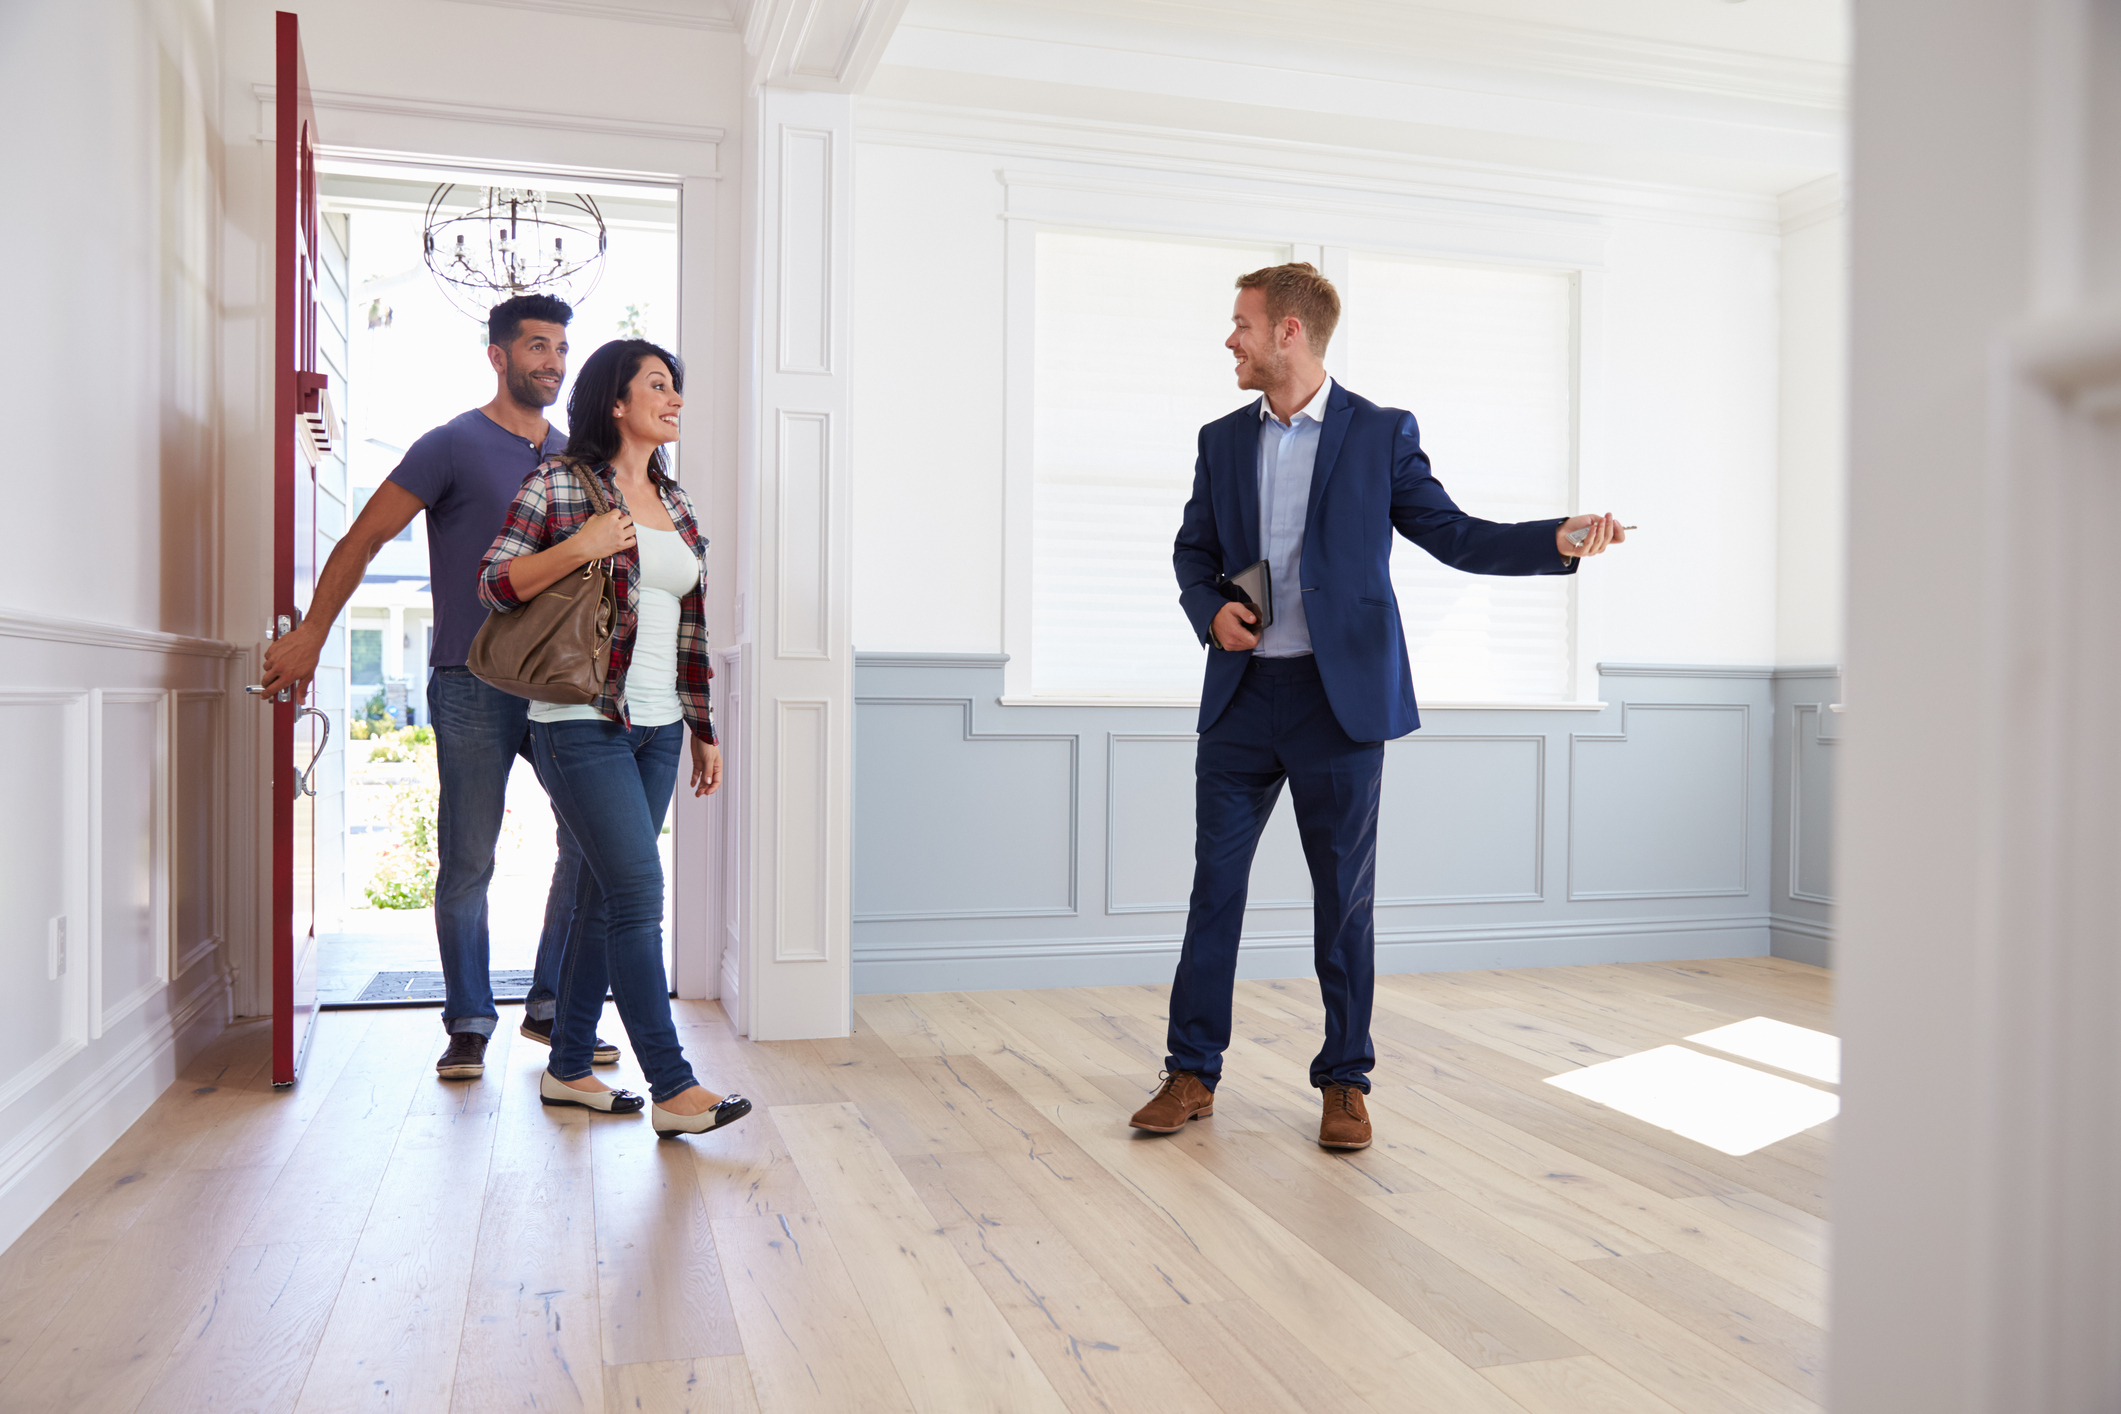 5 Things You Need to Do When Moving into a New Home